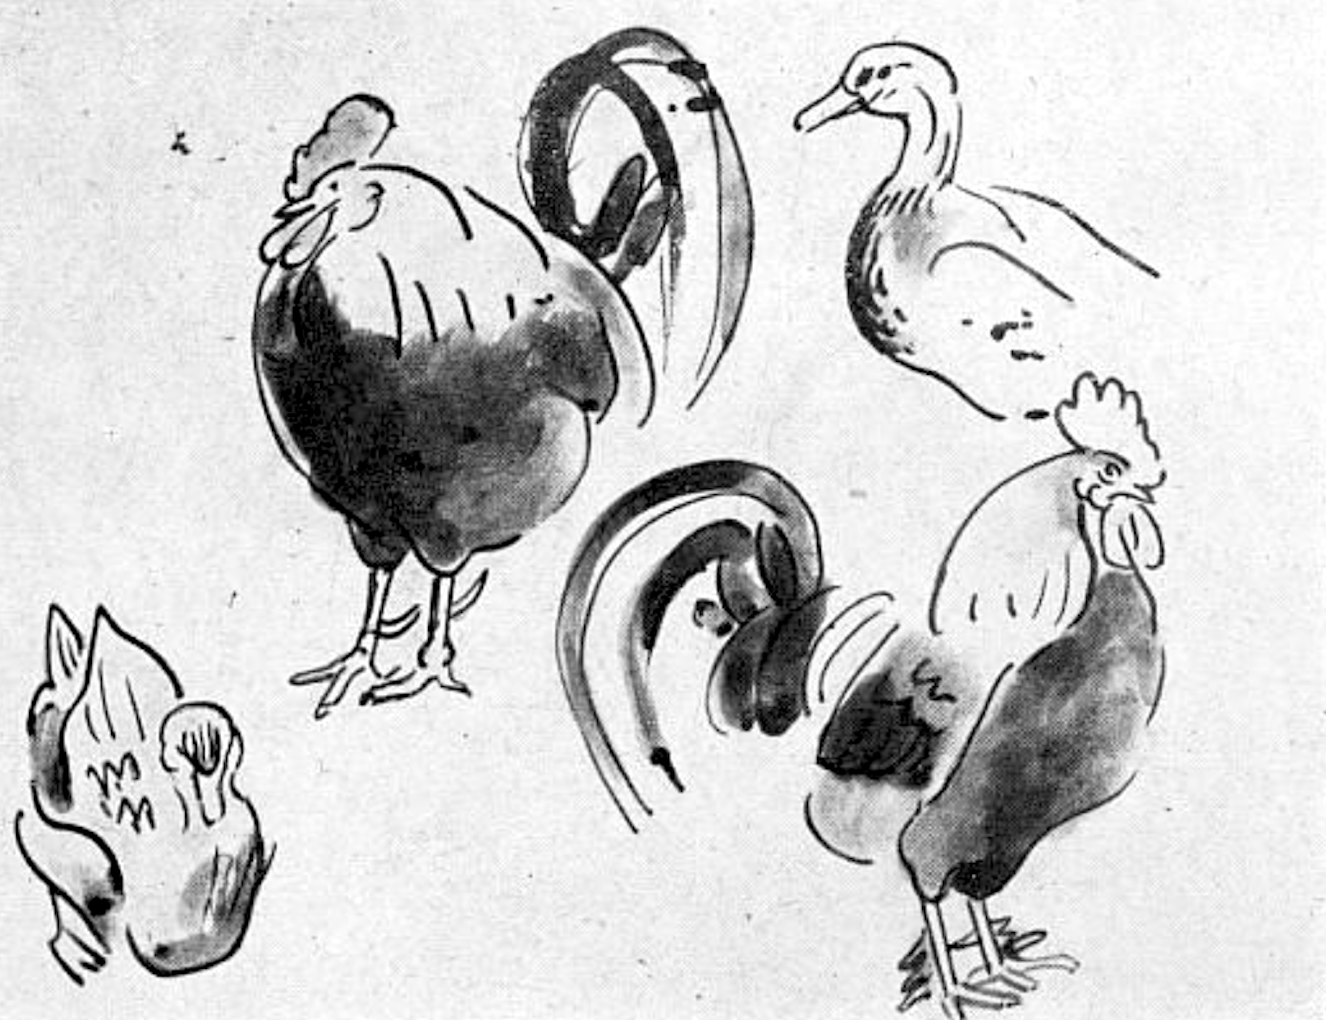 Jane Poupelet, roosters and duck, drawing. Kahn 84